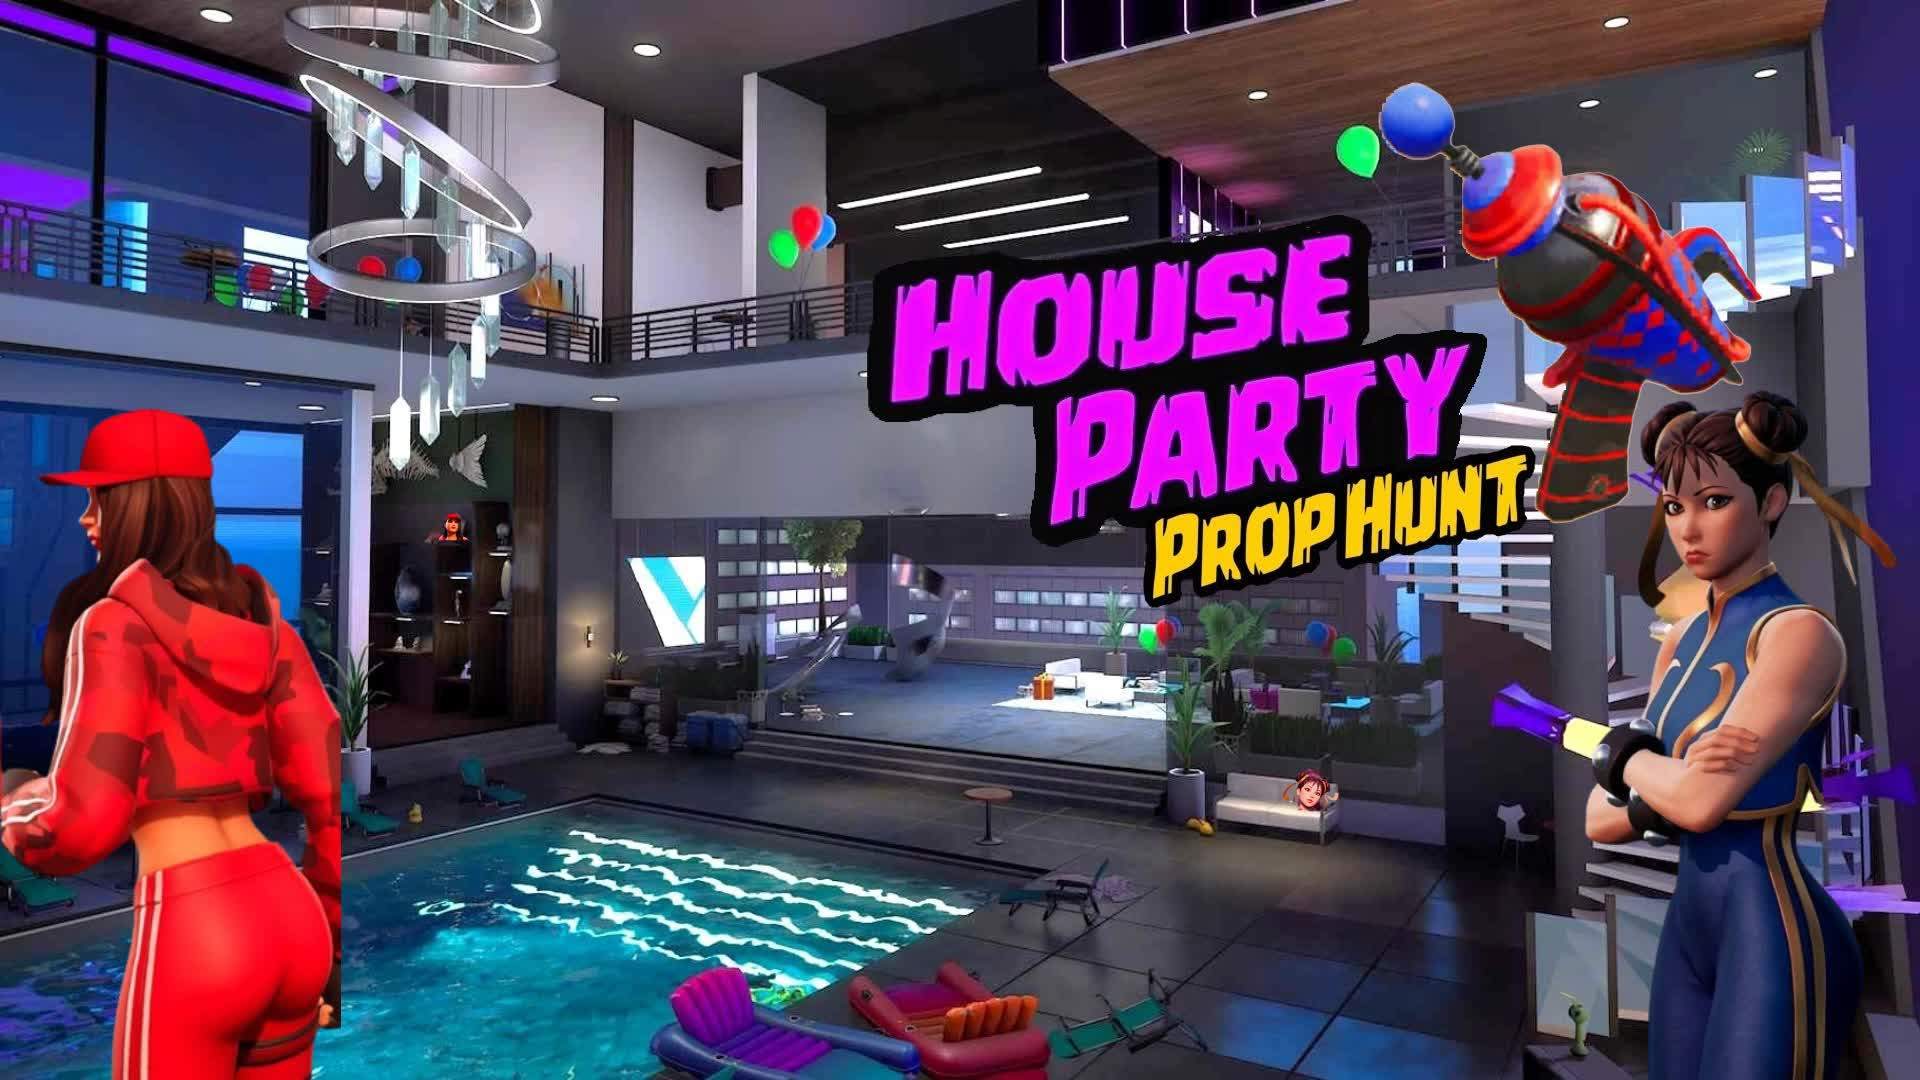 Prop Hunt - Mansion House Party